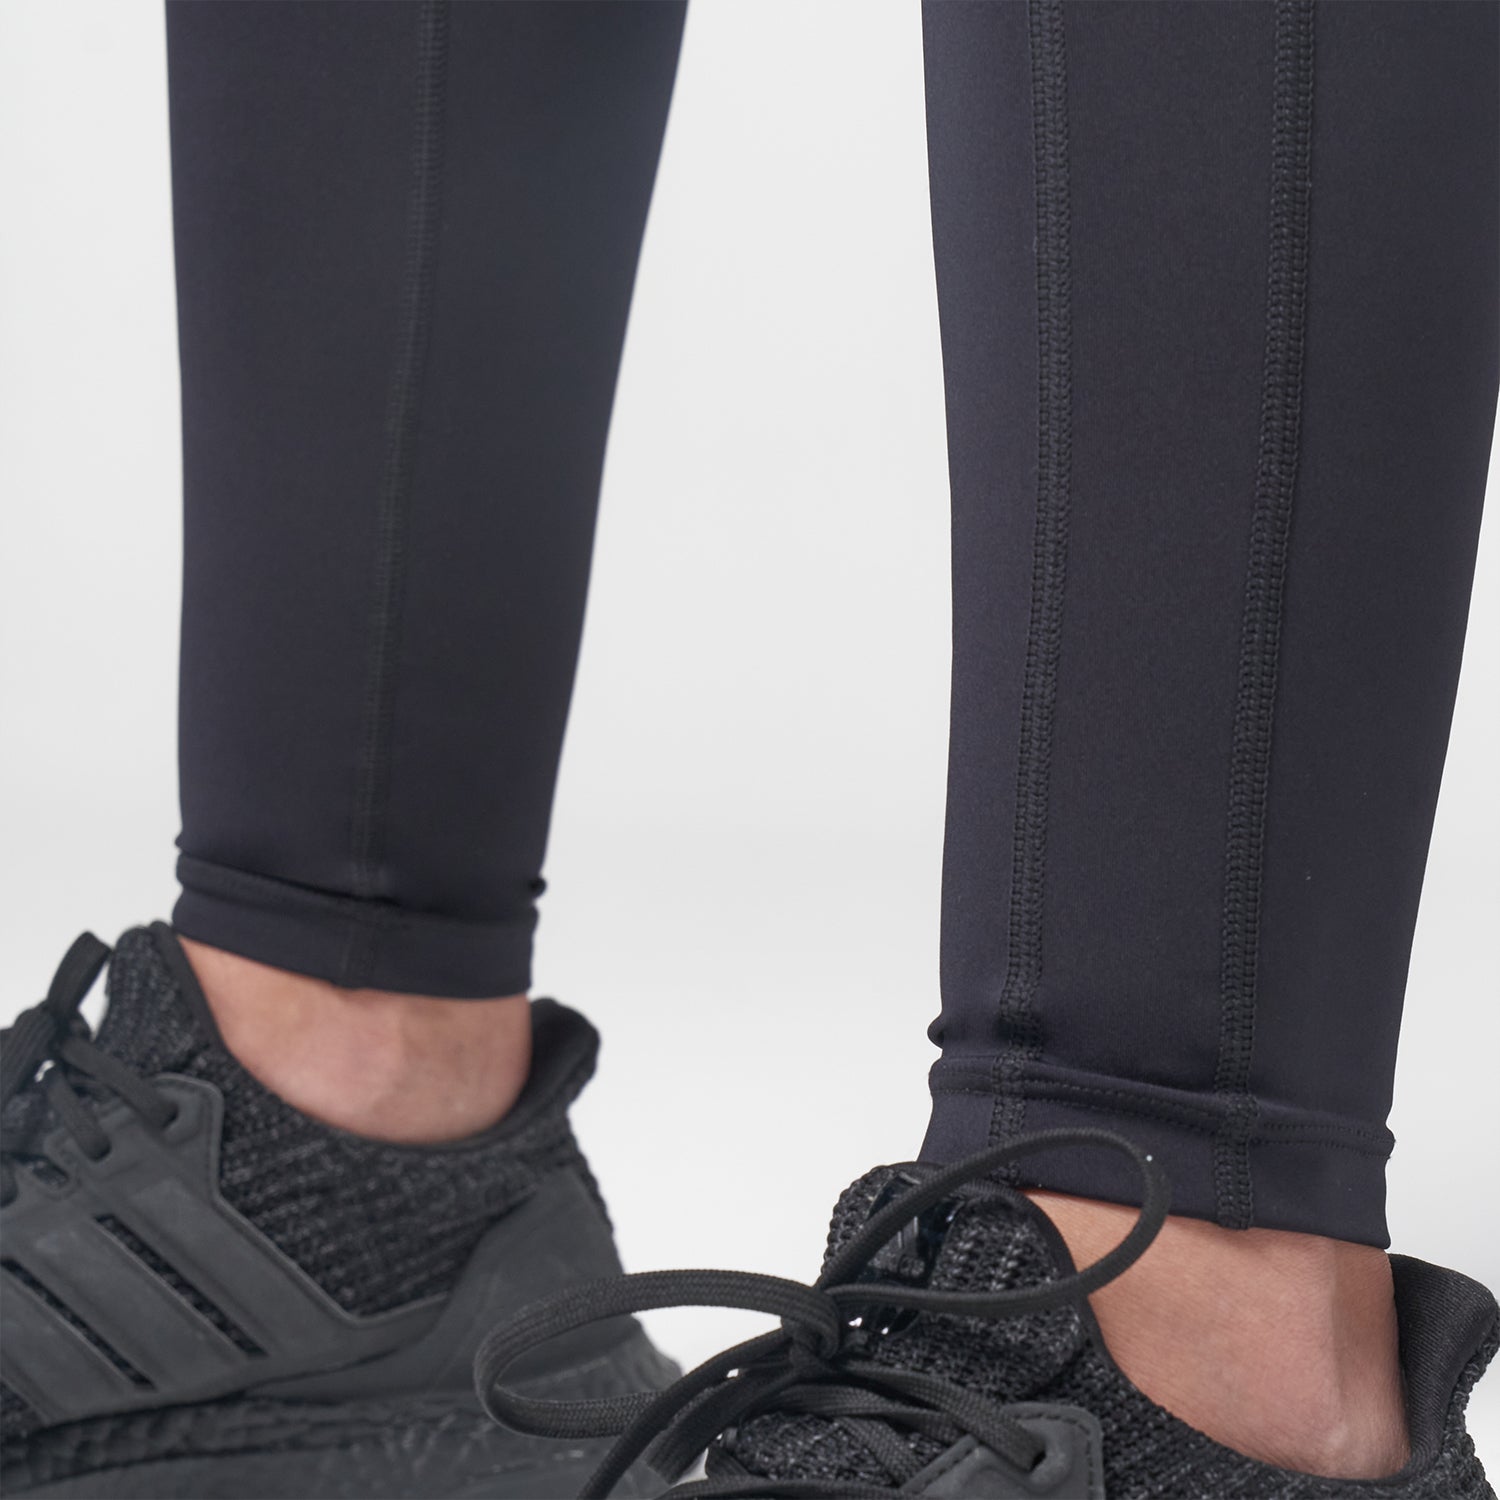 Unified High Waisted Leggings | Black